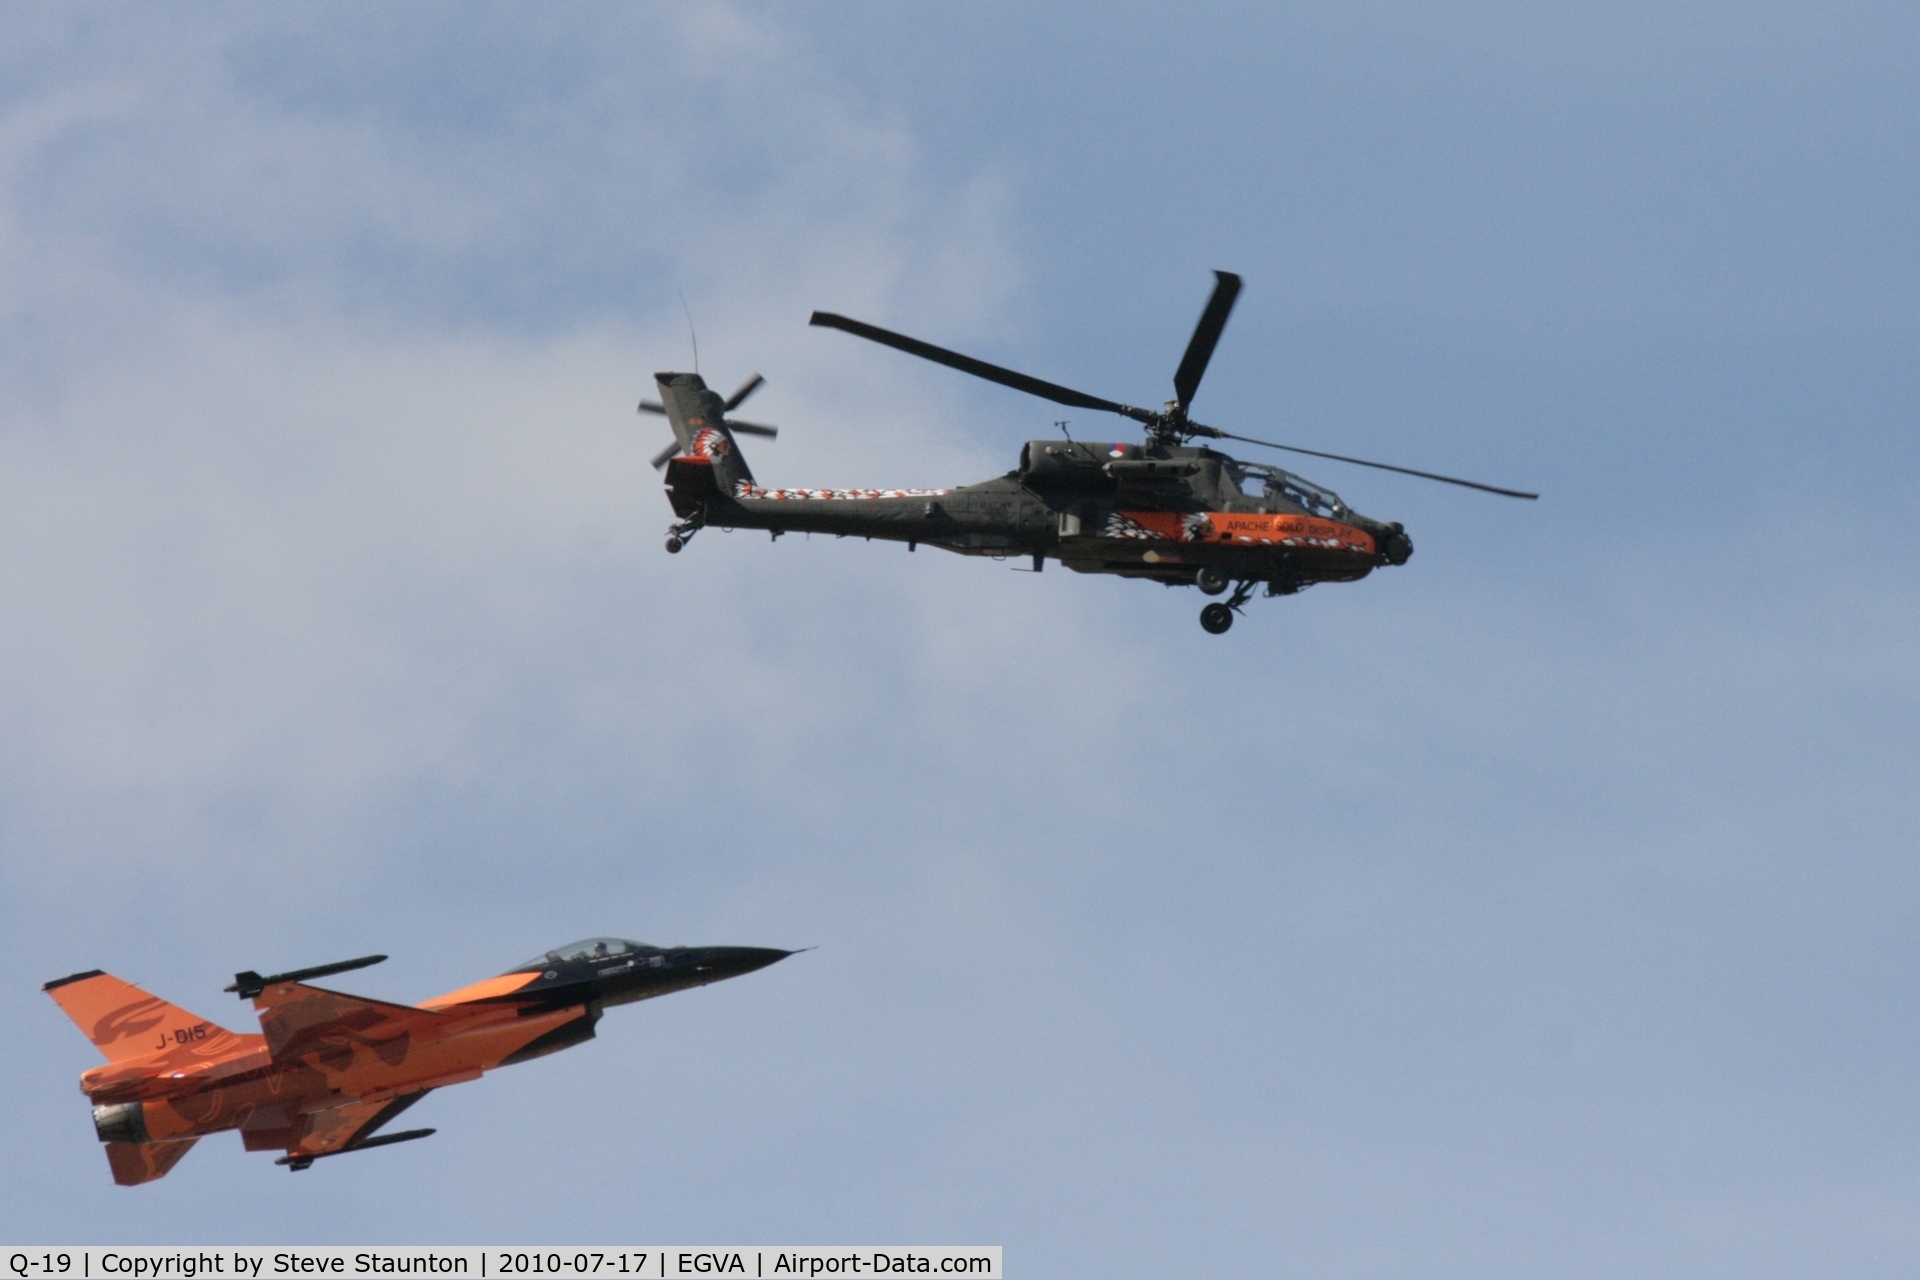 Q-19, Boeing AH-64DN Apache C/N DN019, Taken at the Royal International Air Tattoo 2010, displaying with F-16AM J-015 (two Tigers)